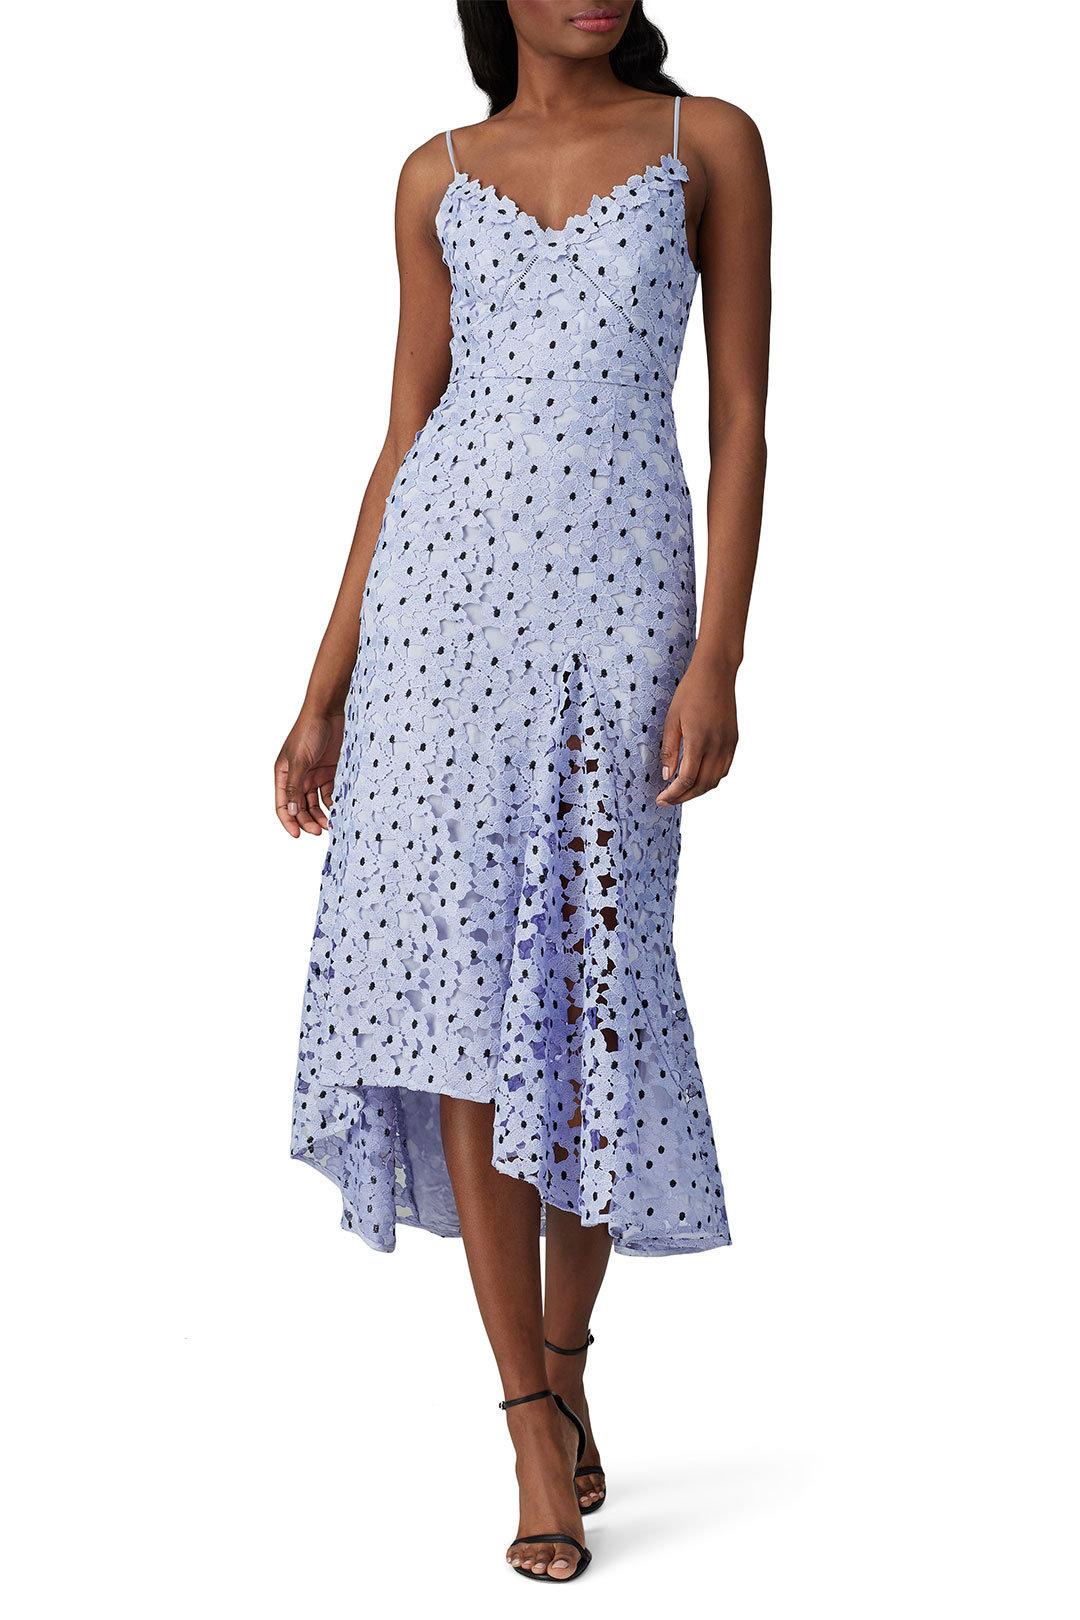 The Best Wedding Guest Dresses for Summer 2022